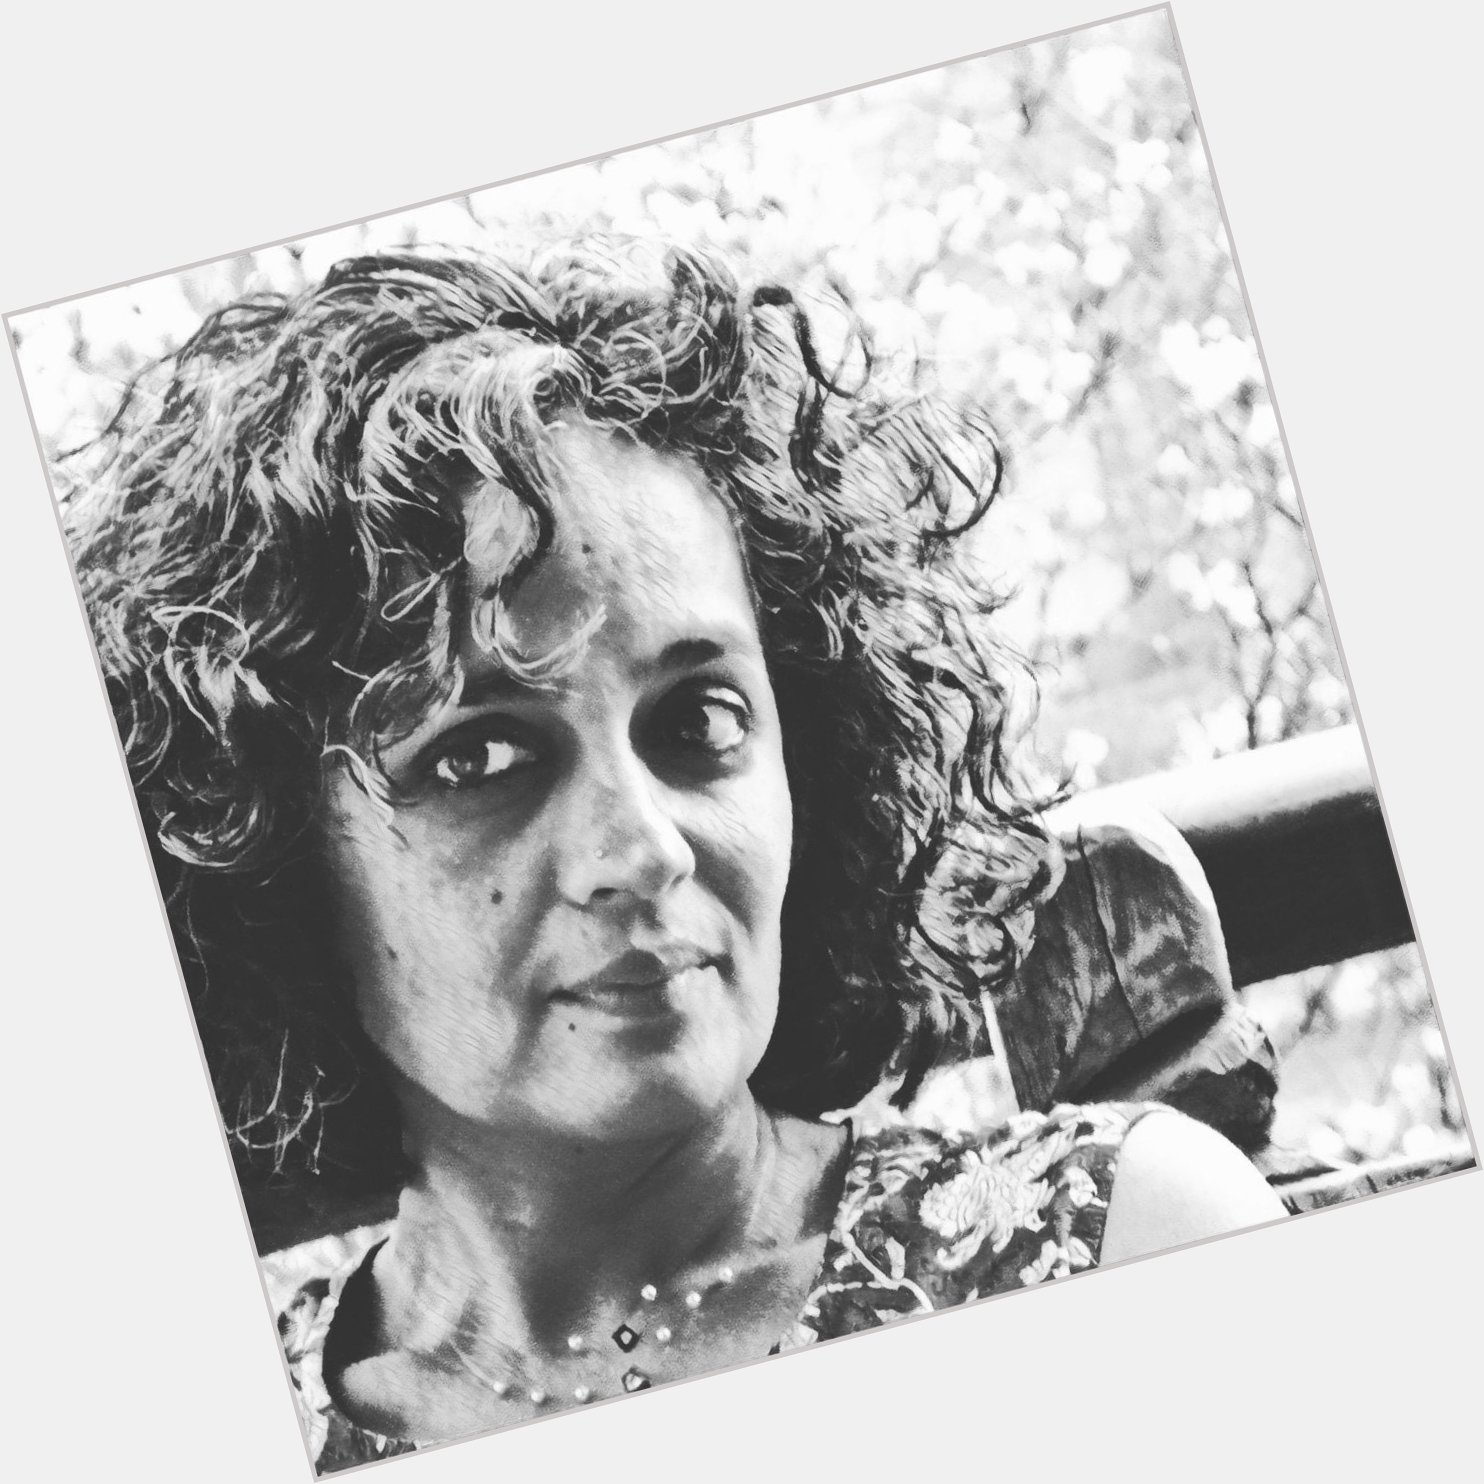 Wishing a happy birthday and warm wishes to Arundhati Roy, one of few unmuted voices of our times. 